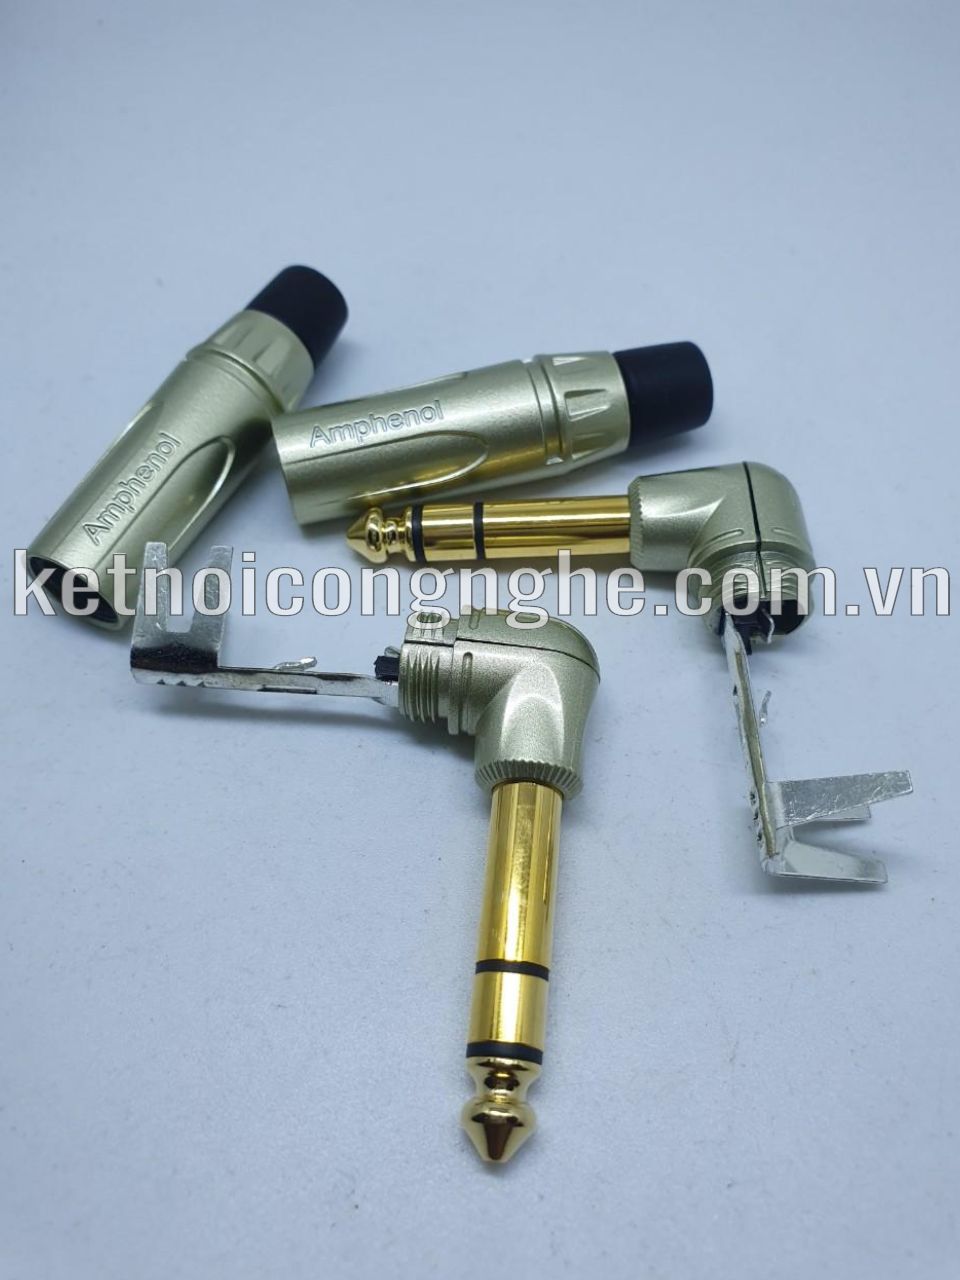 Jack Amphenol ACPS-TN-AU jack 6 ly cong 6.3mm connector